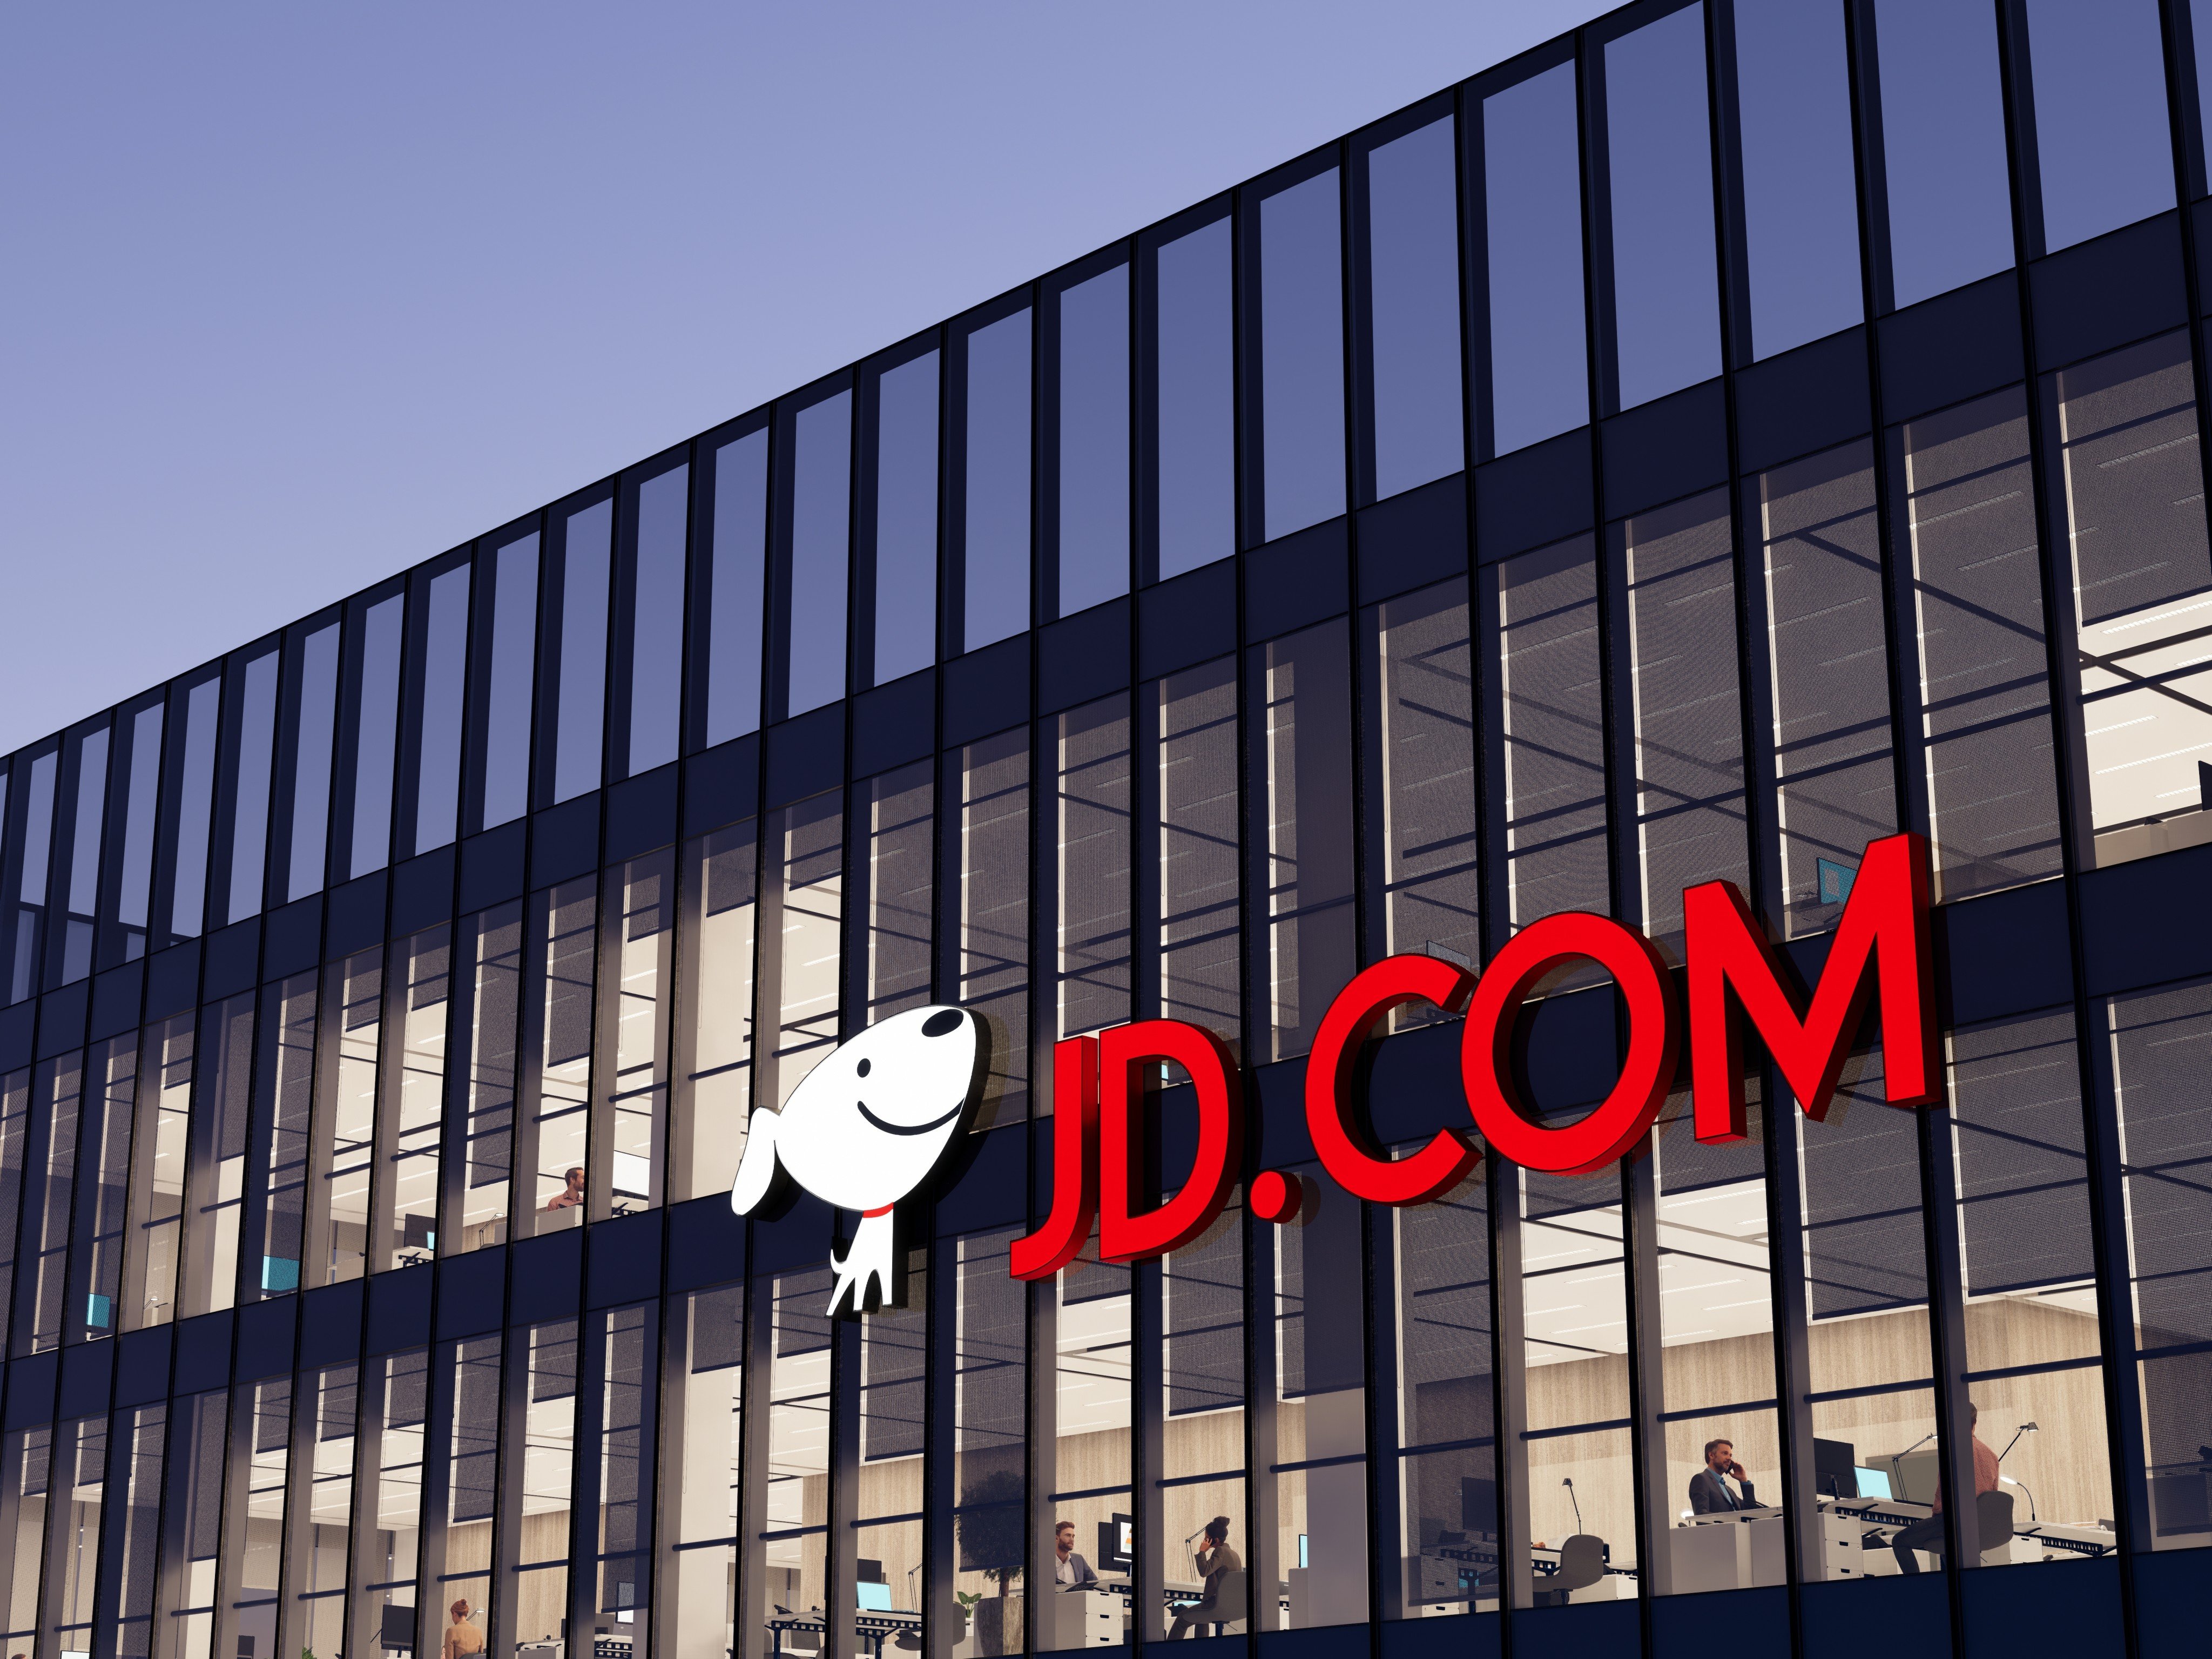 JD.com’s logo and mascot are seen at the e-commerce giant’s headquarters in Beijing on May 2, 2022. Photo: Shutterstock